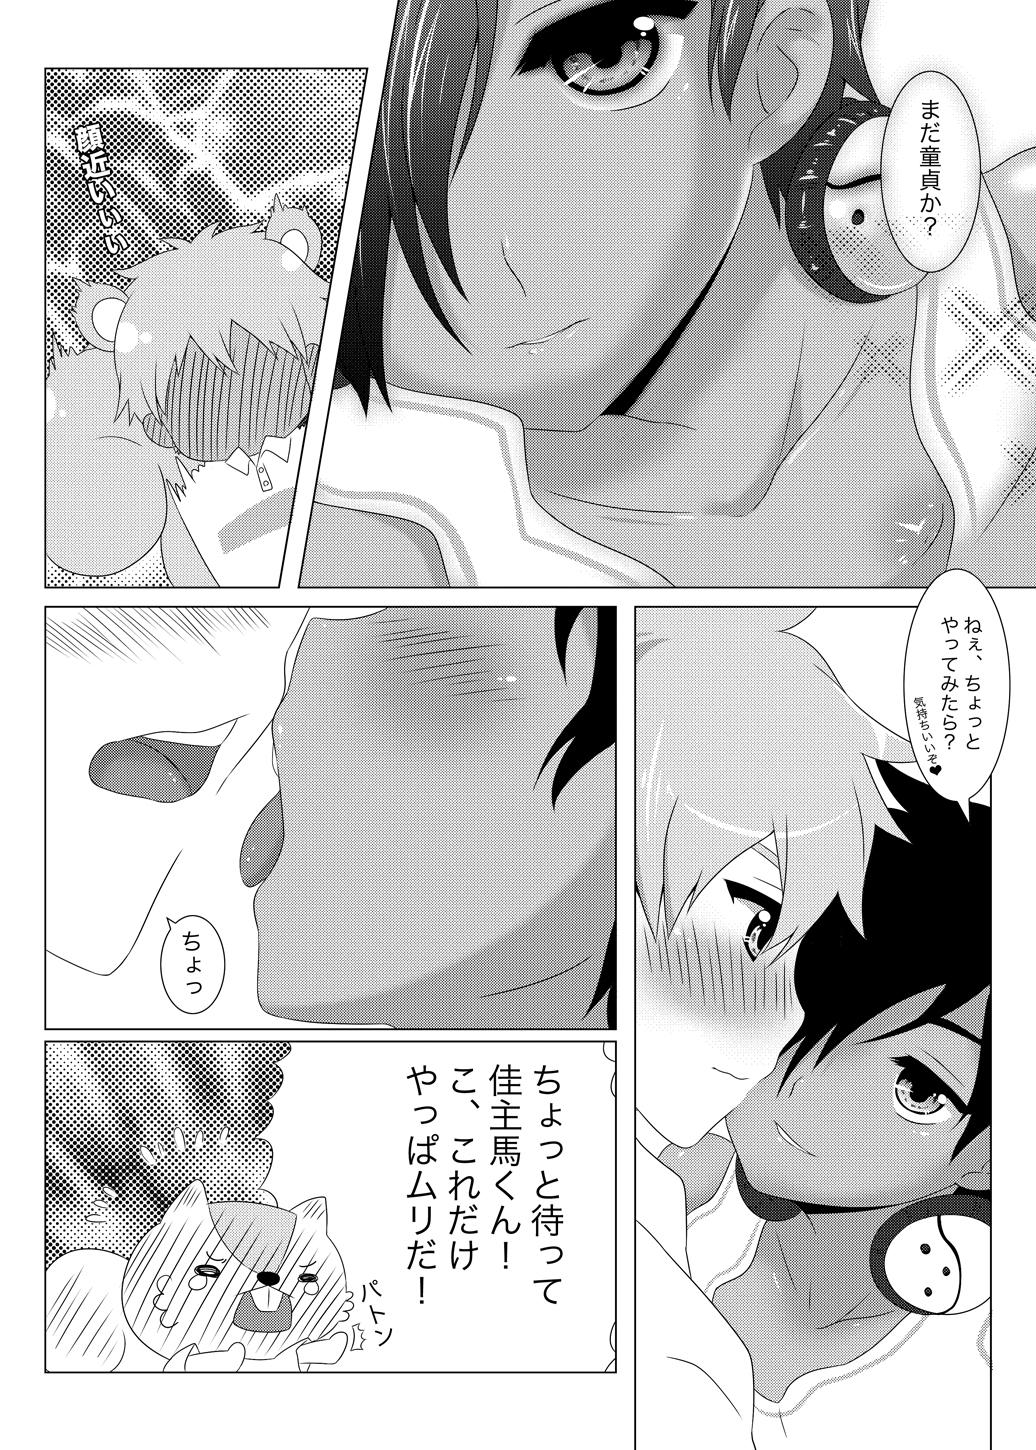 Legs Another Summer 2 - Summer wars Jerk Off Instruction - Page 3